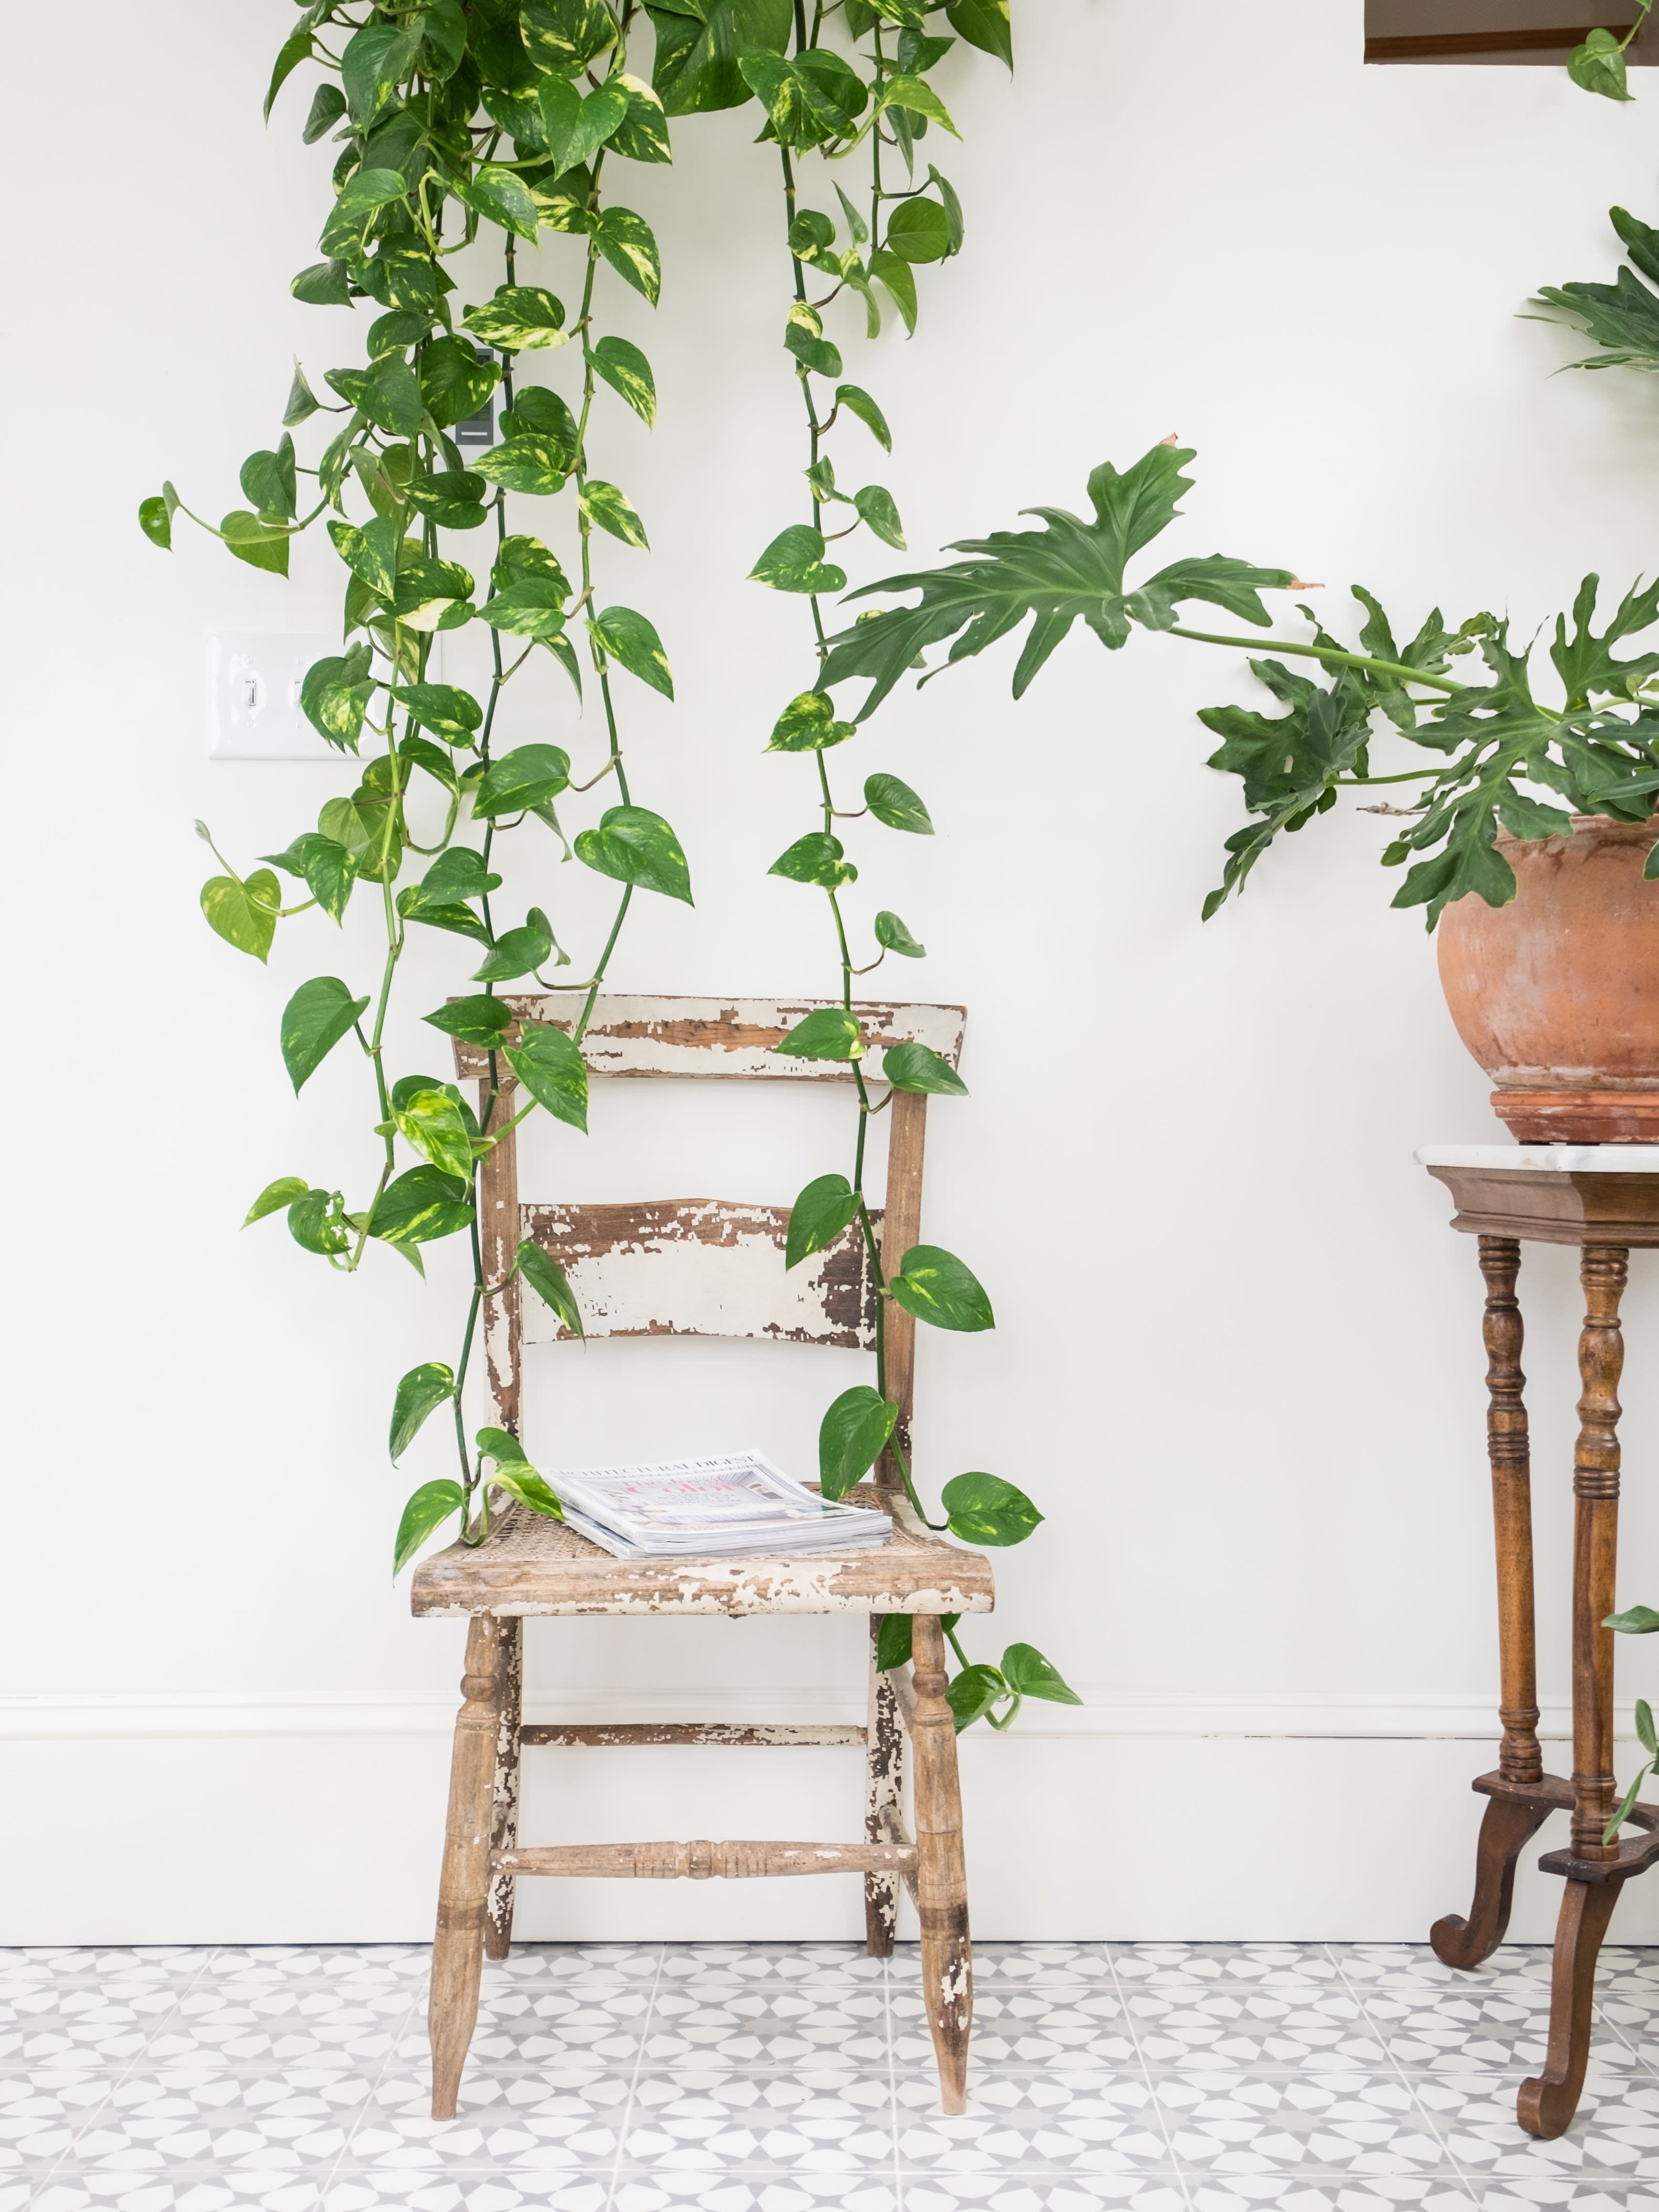 Pothos Plant Care   How to Grow Pothos Plants   Apartment Therapy